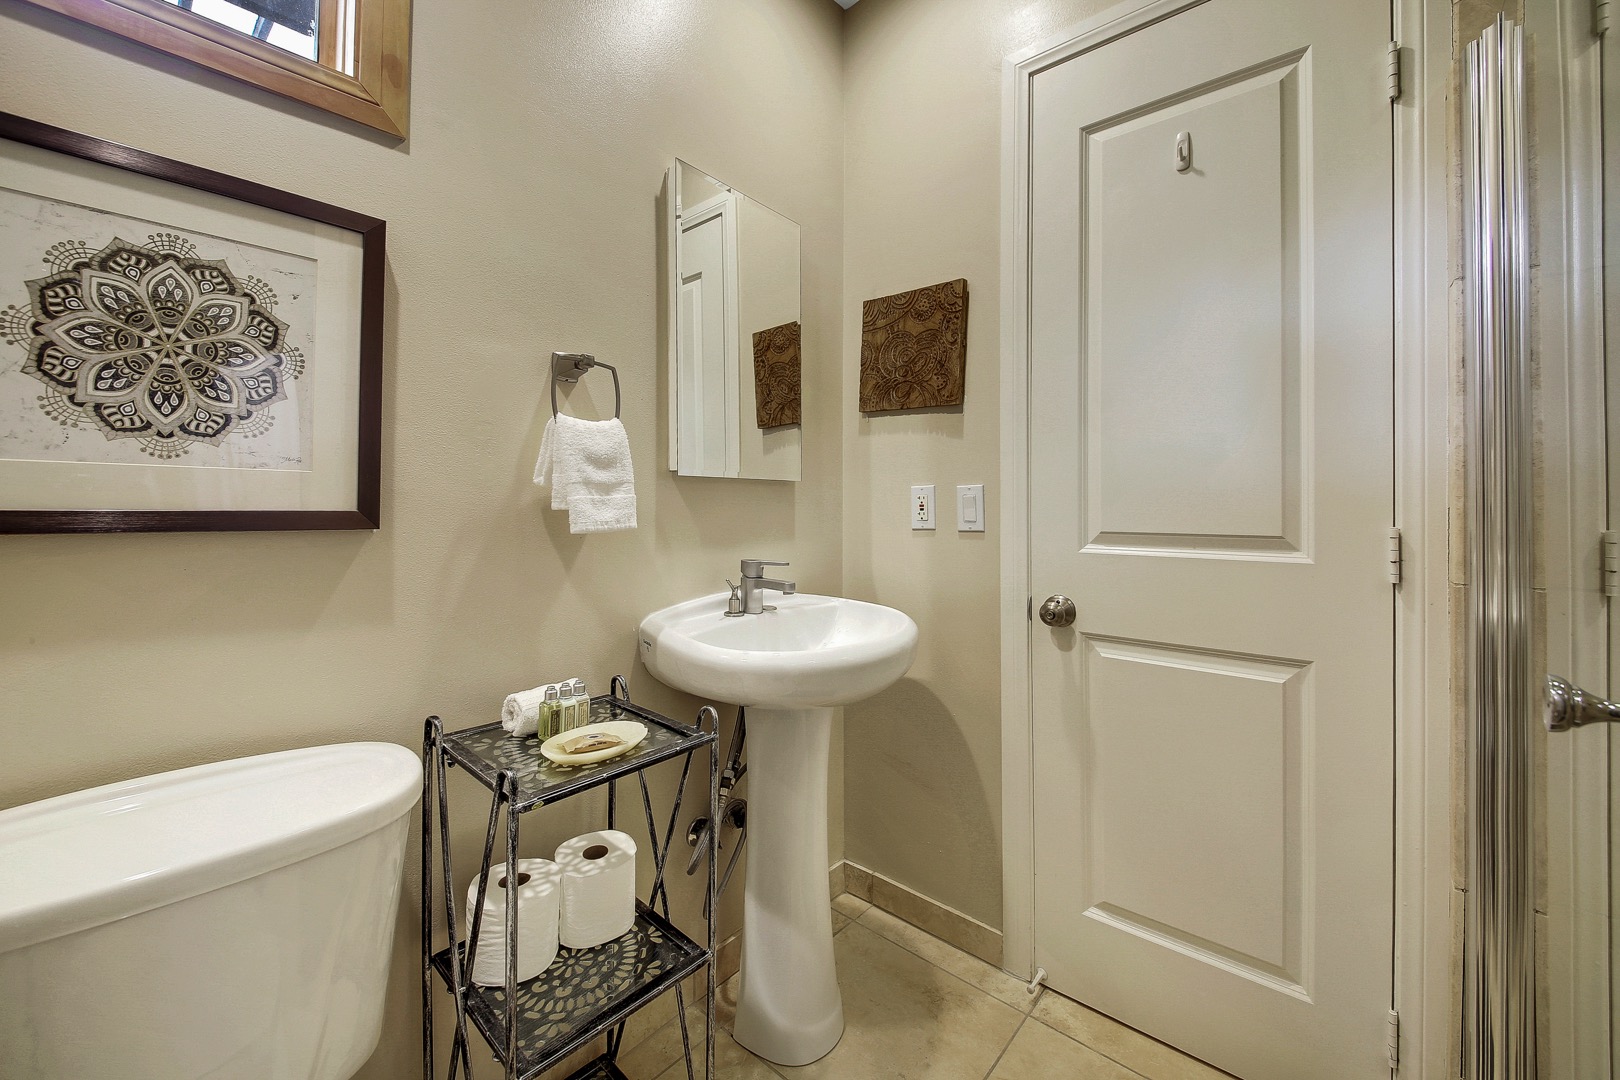 Suite 3 bath with large, tiled shower.